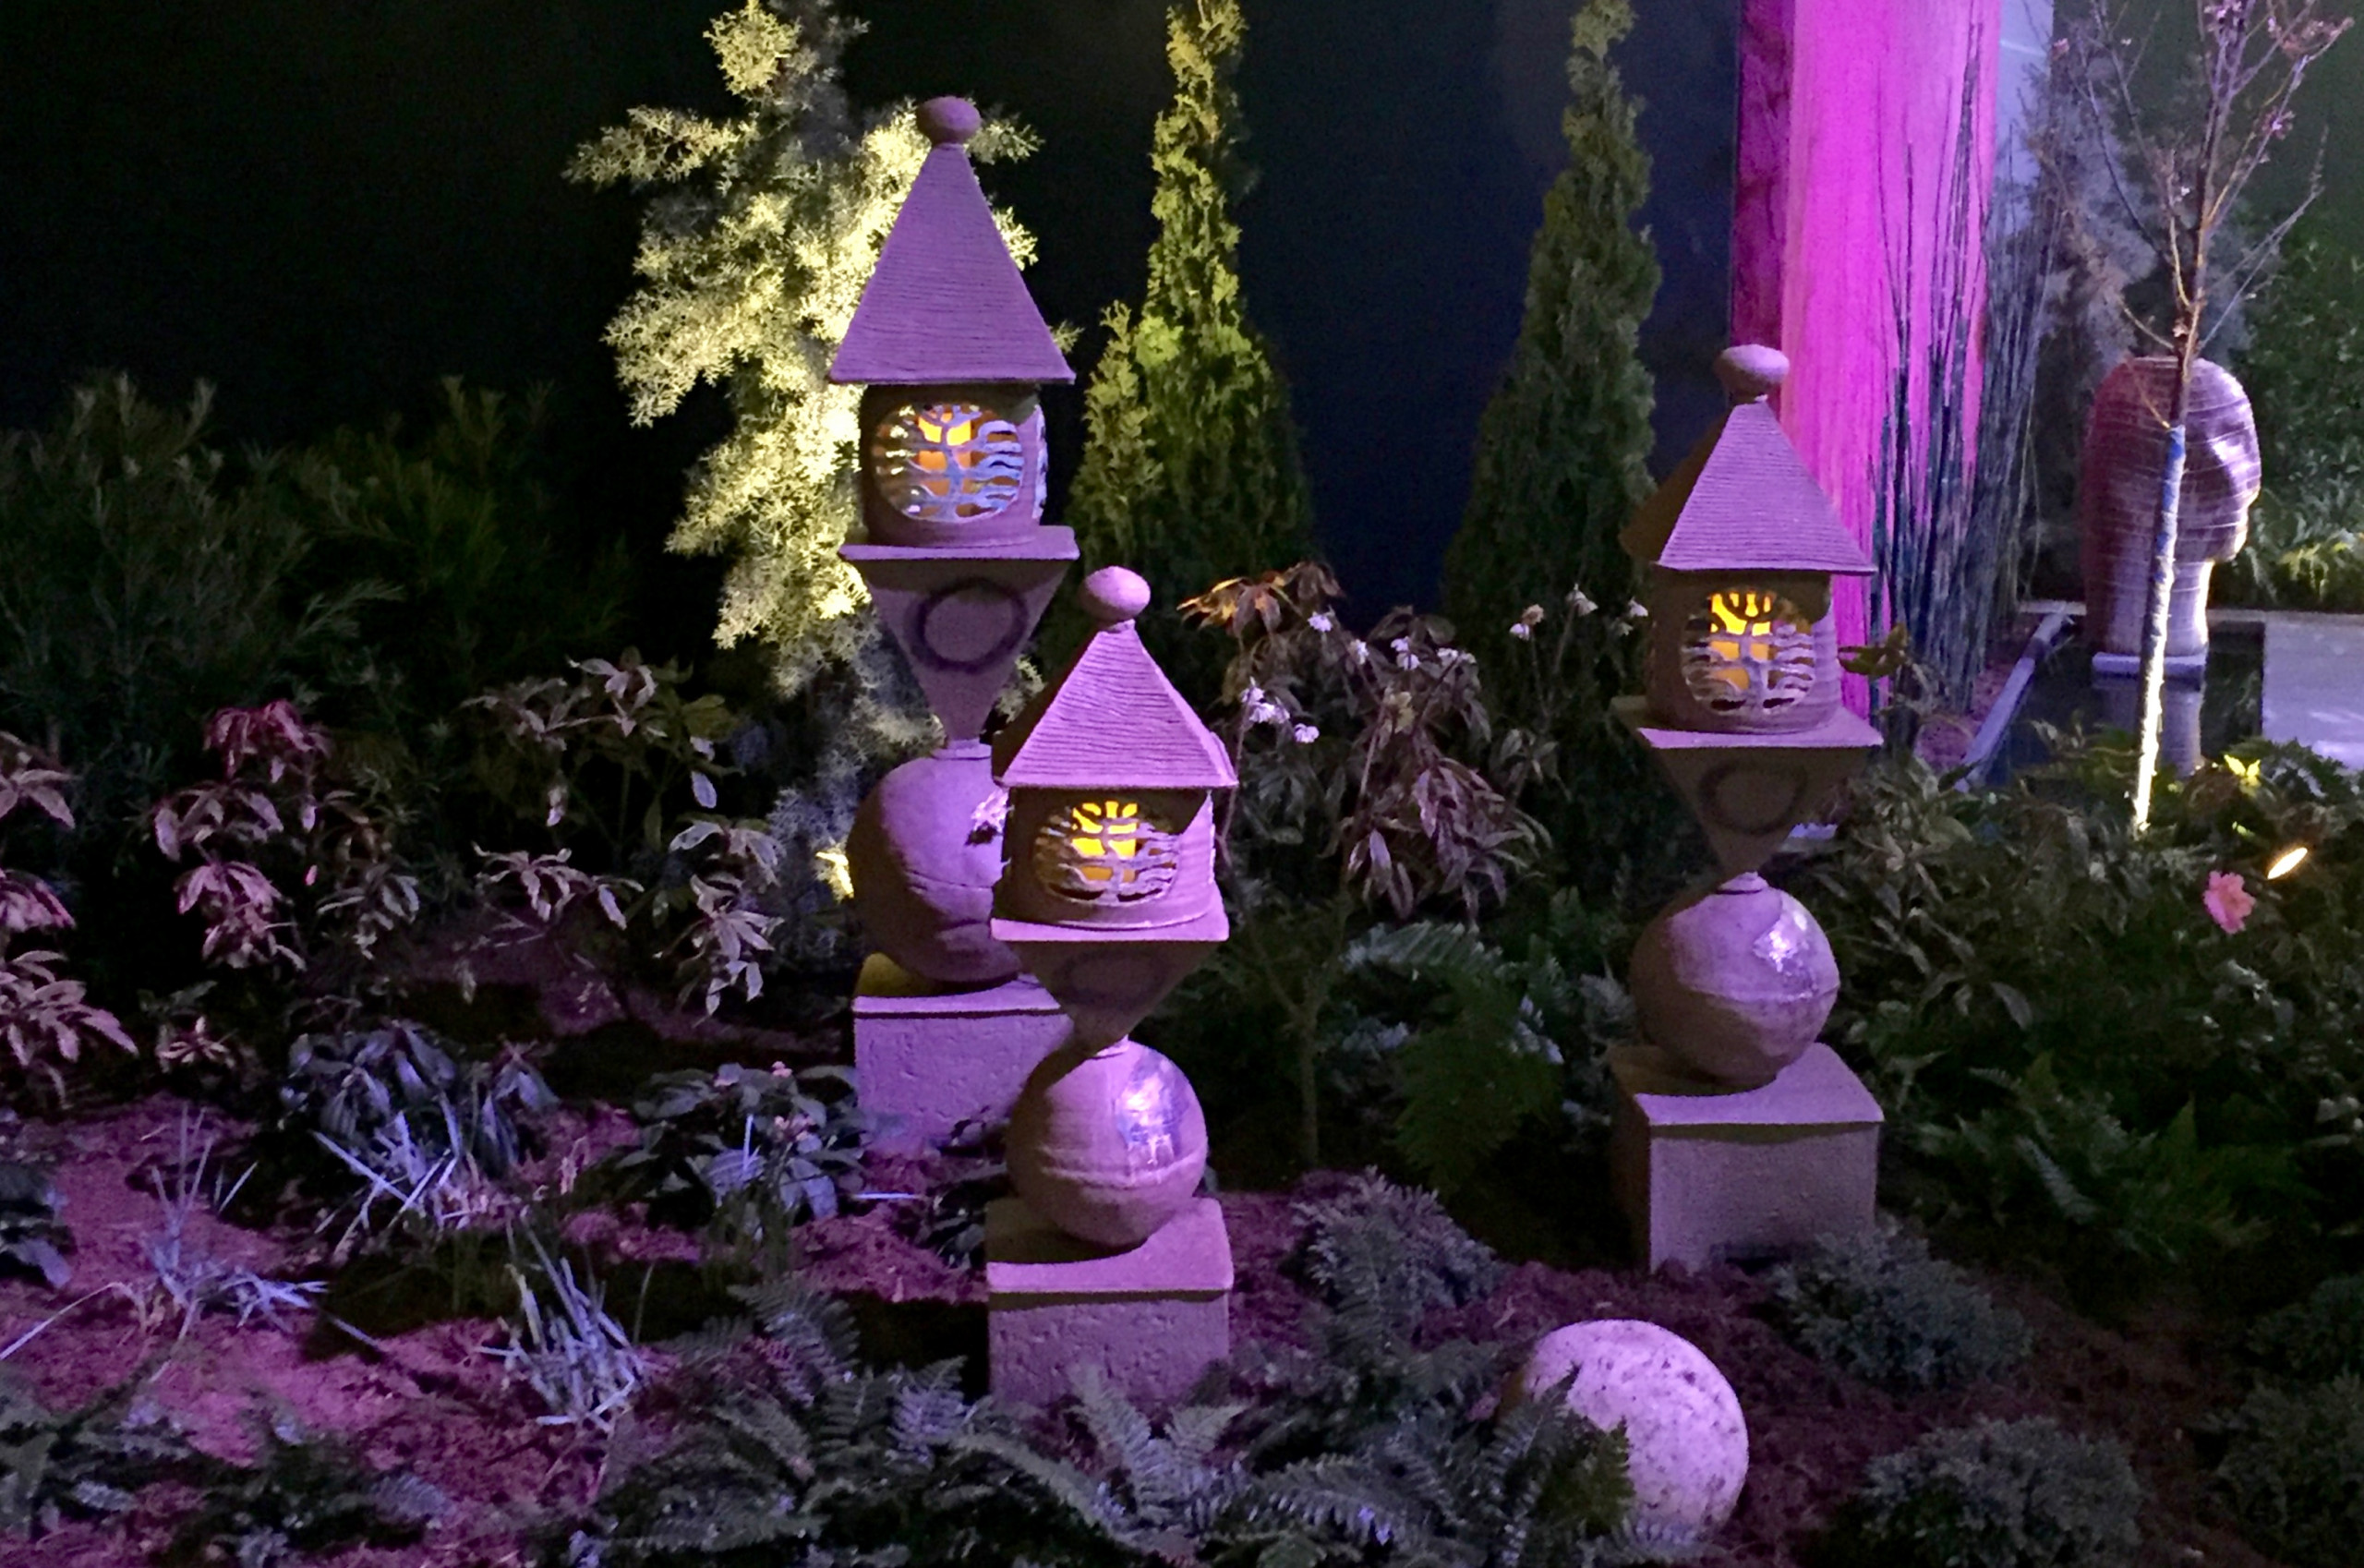 Southern Spring Home and Garden Show Entry 2016:  Spring in Japan